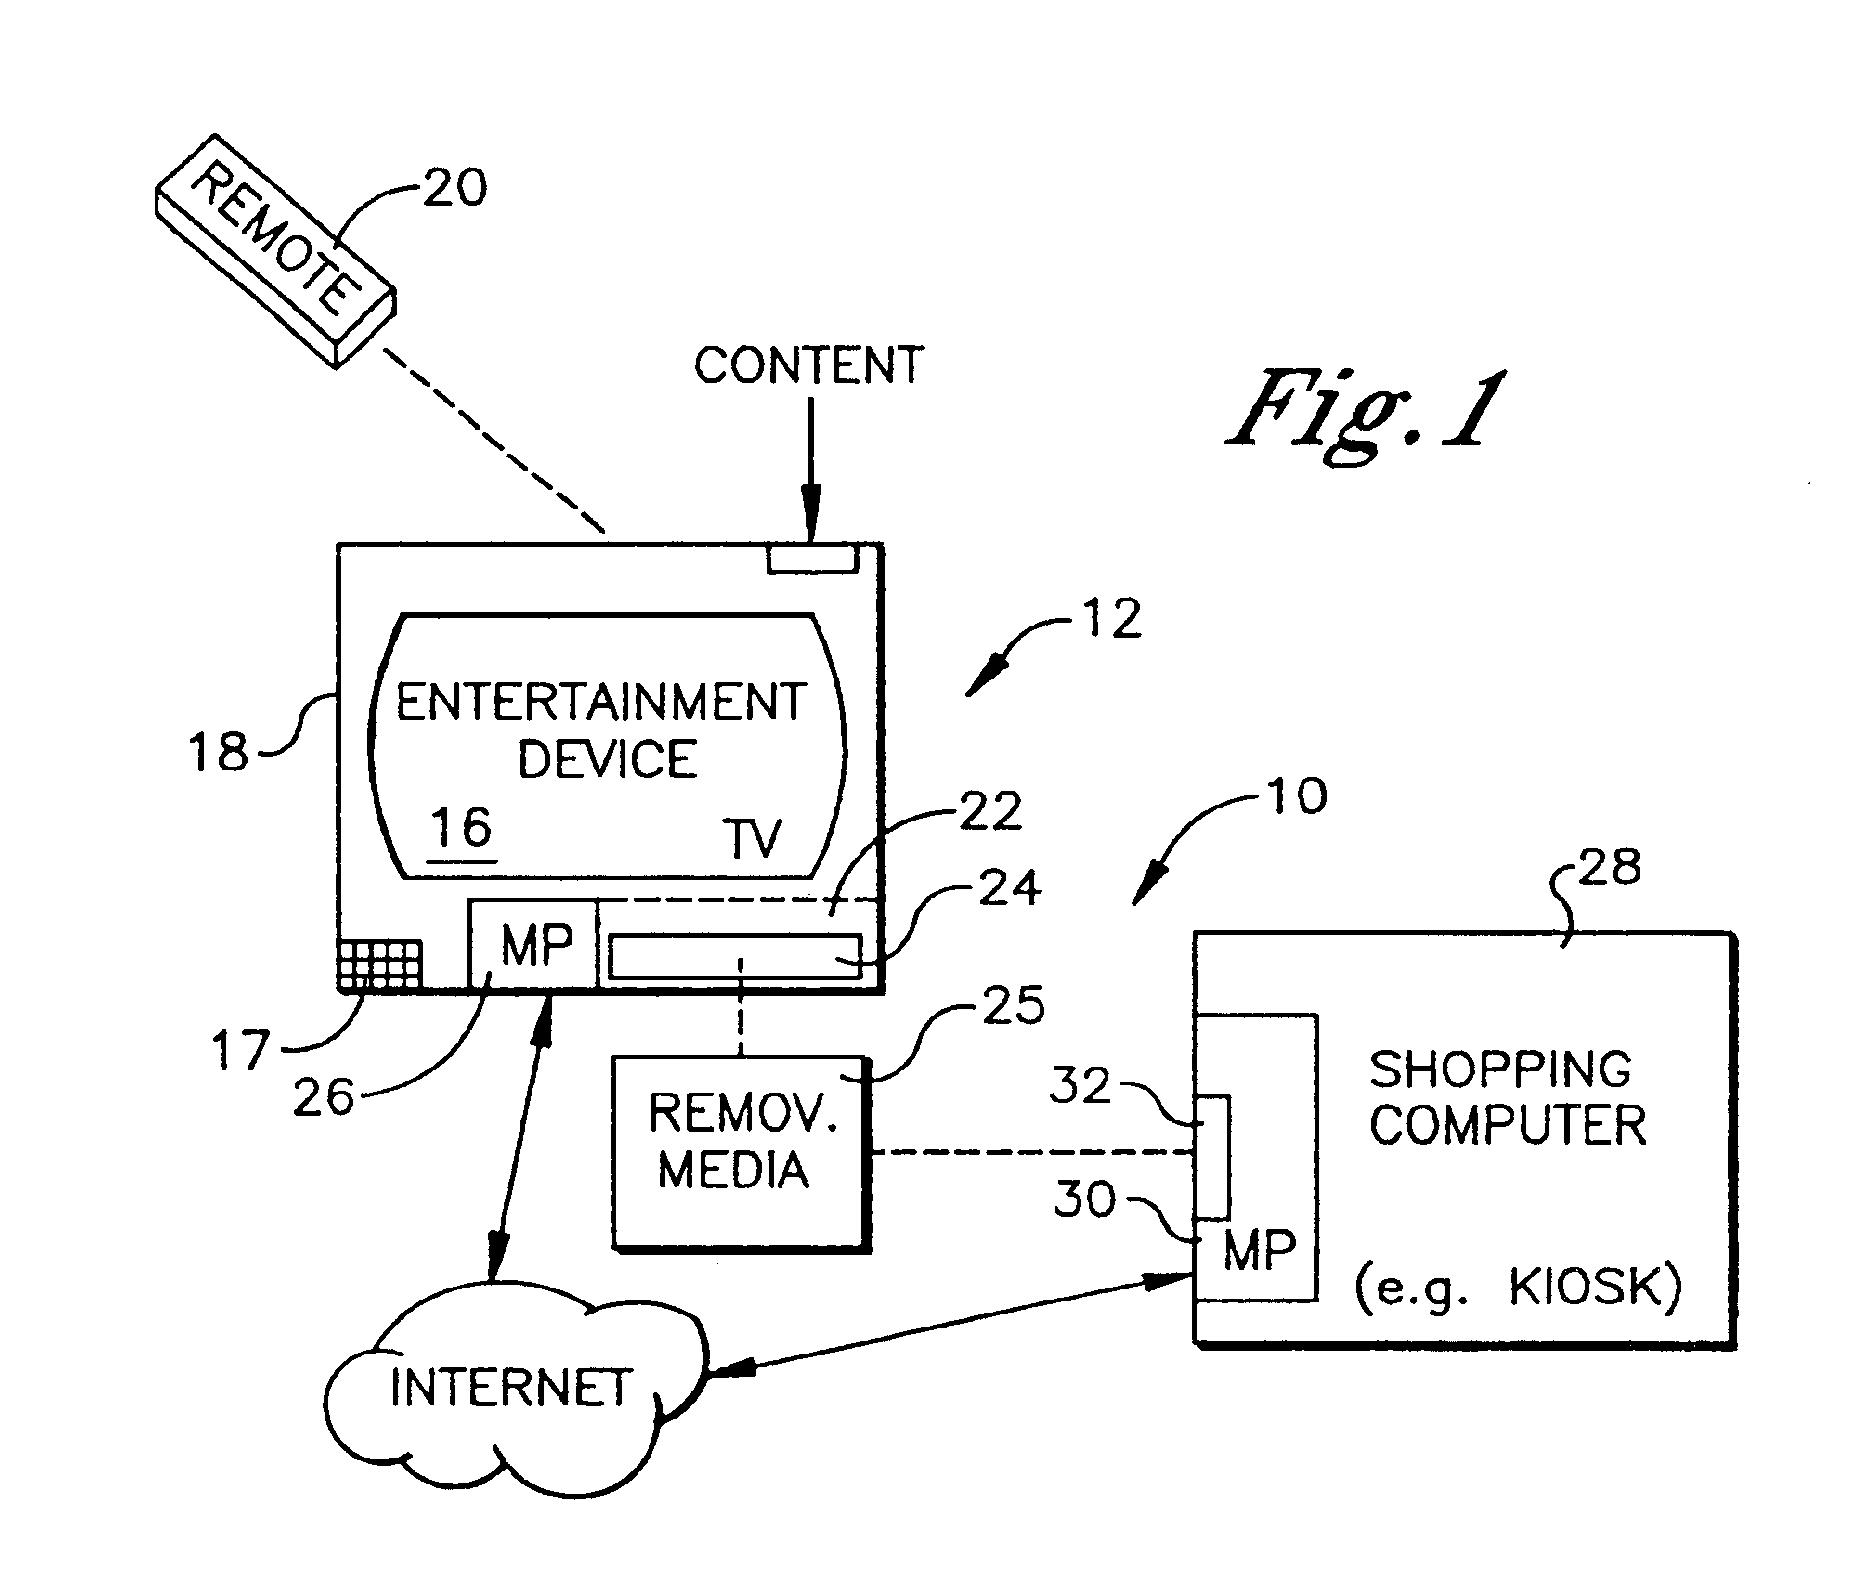 System and method for establishing viewer shopping preferences based on viewing and listening preferences